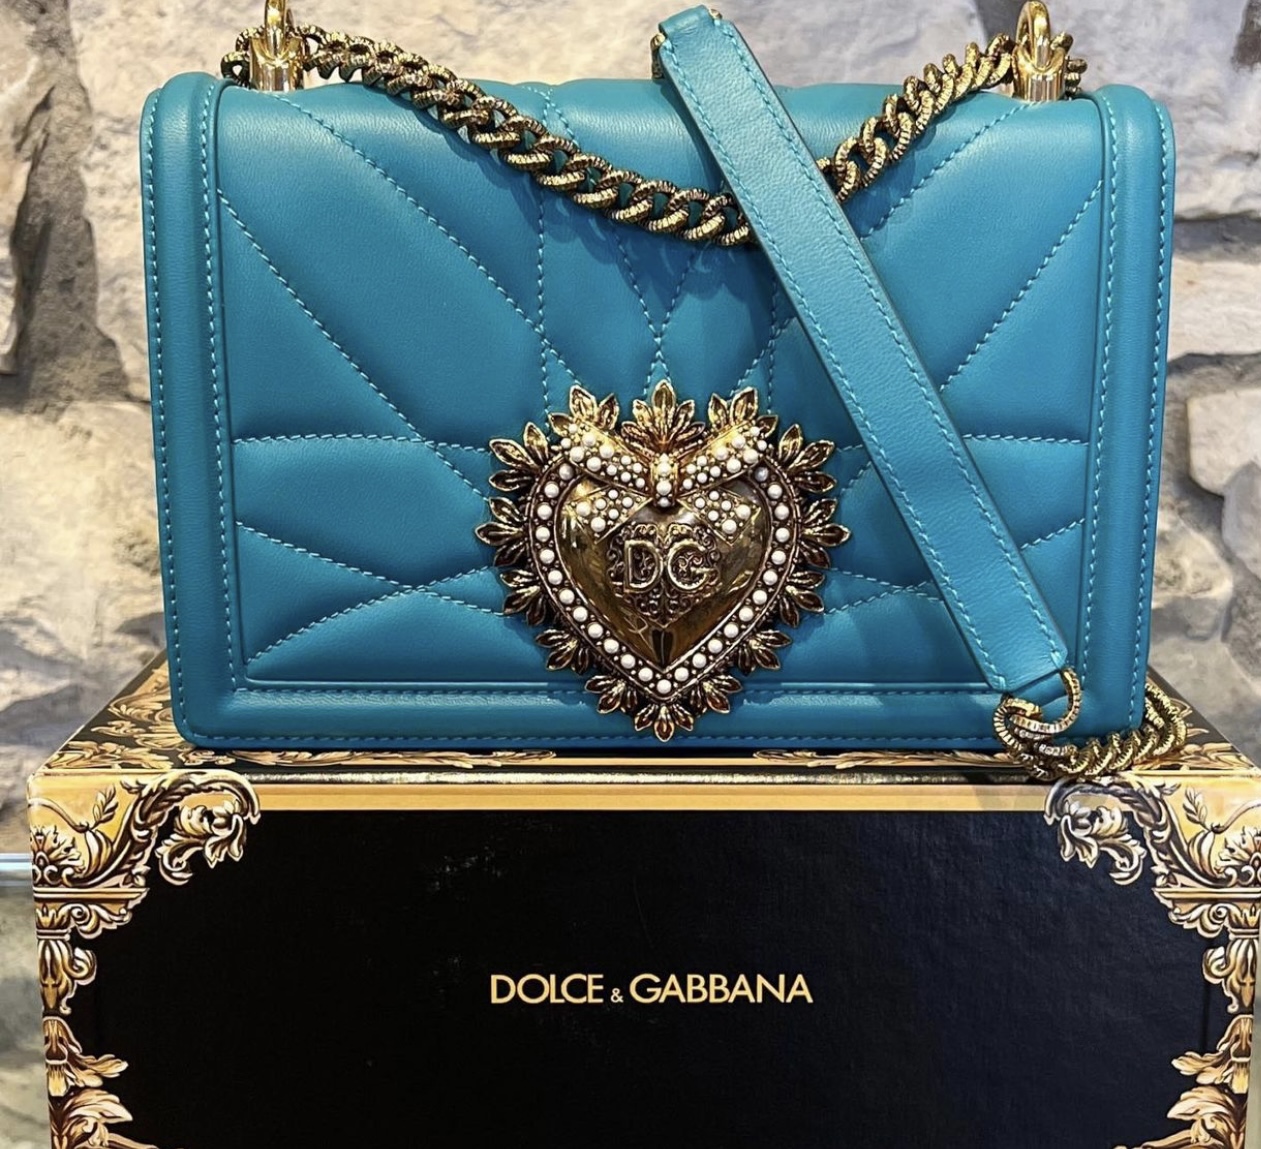 DOLCE & GABBANA Medium Devotion Crossbody Shoulder Bag in Turquoise - More  Than You Can Imagine